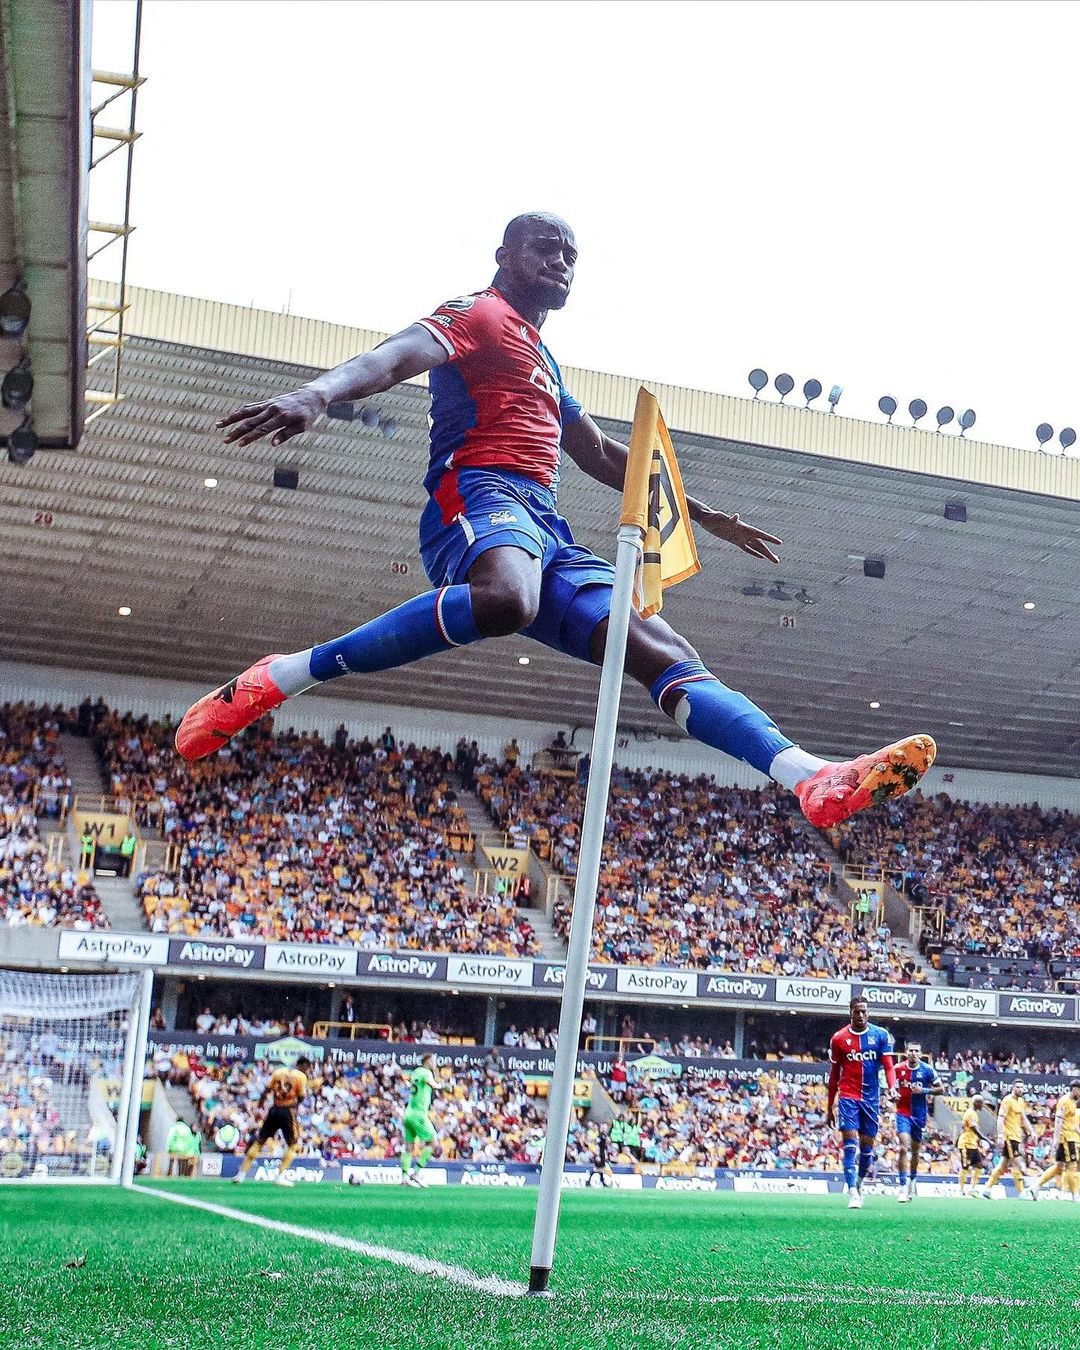 Wolves 1-3 Crystal Palace